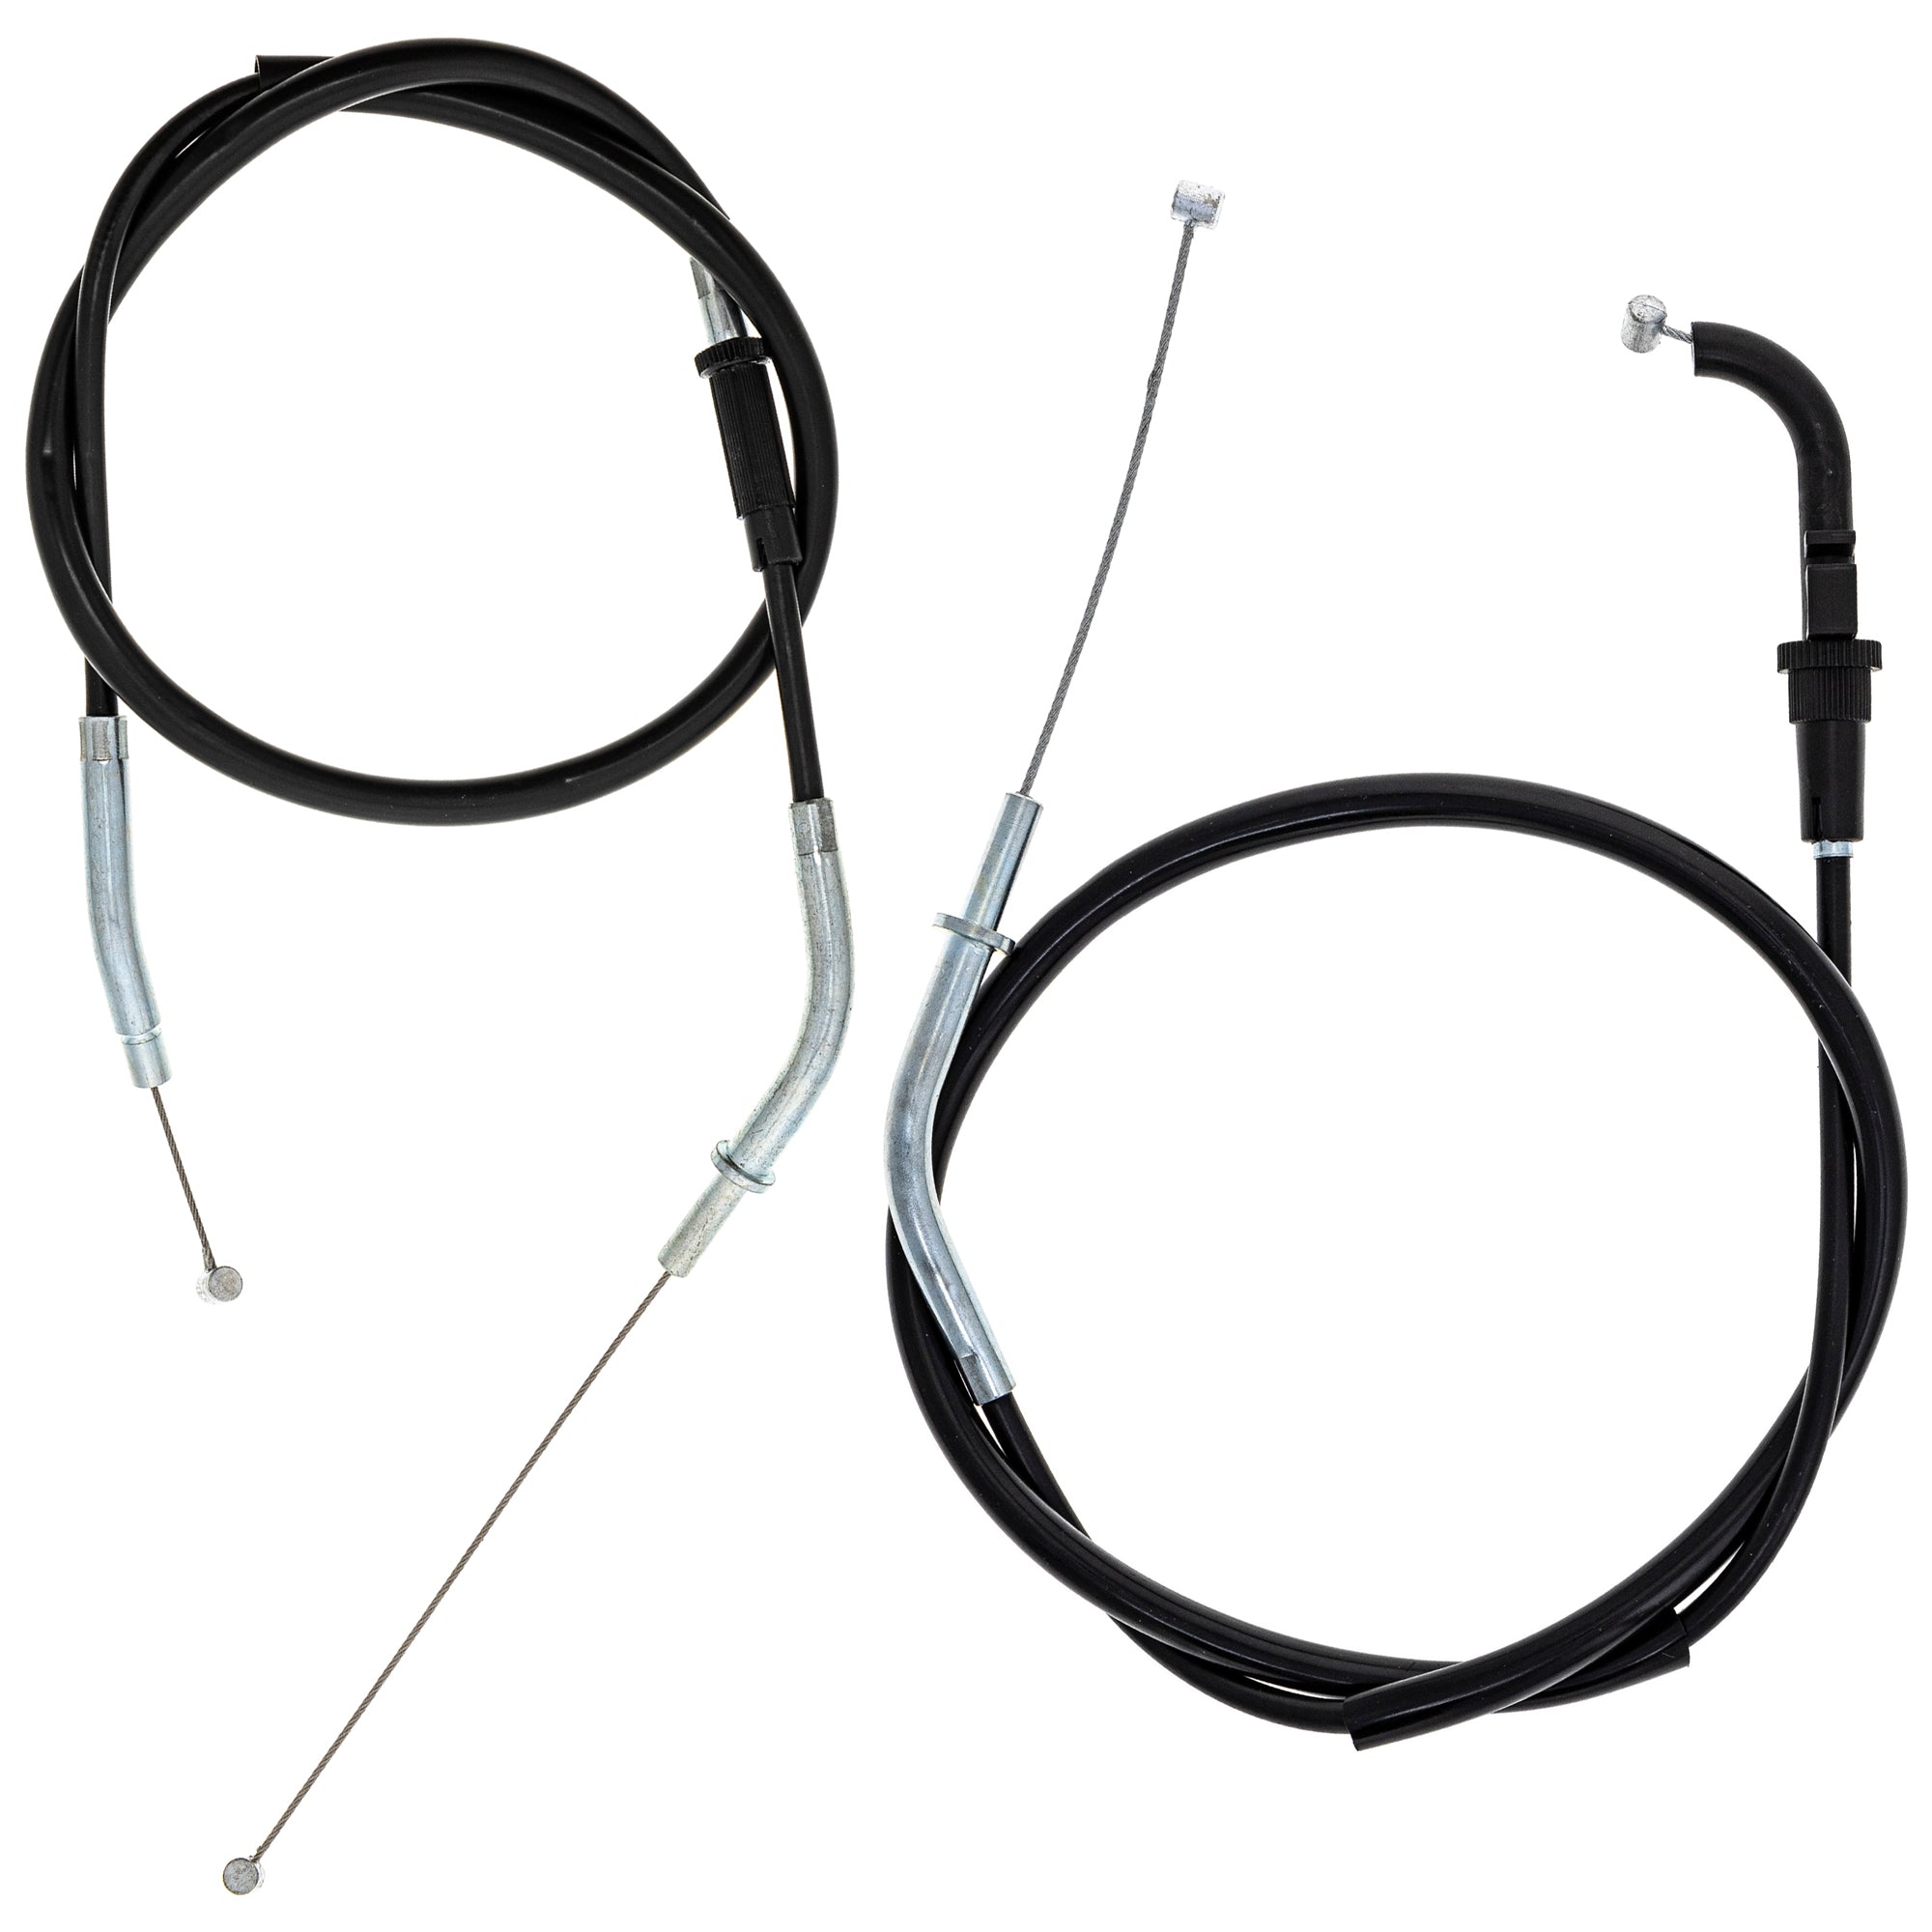 Throttle Cable Set for zOTHER Ninja NICHE MK1005910